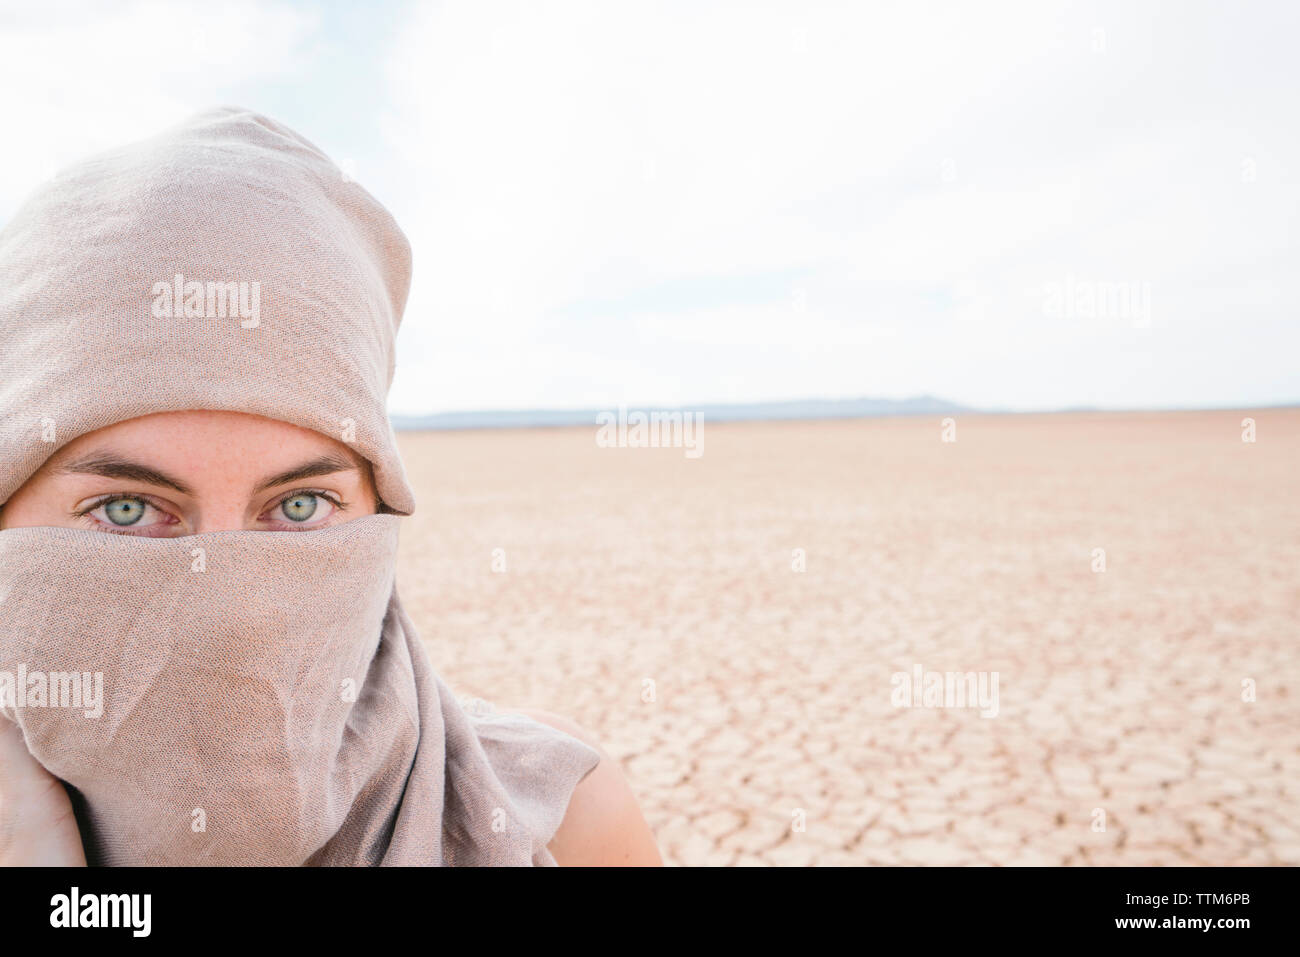 Portrait of woman wearing scarf standing at barren landscape against sky during sunny day Stock Photo